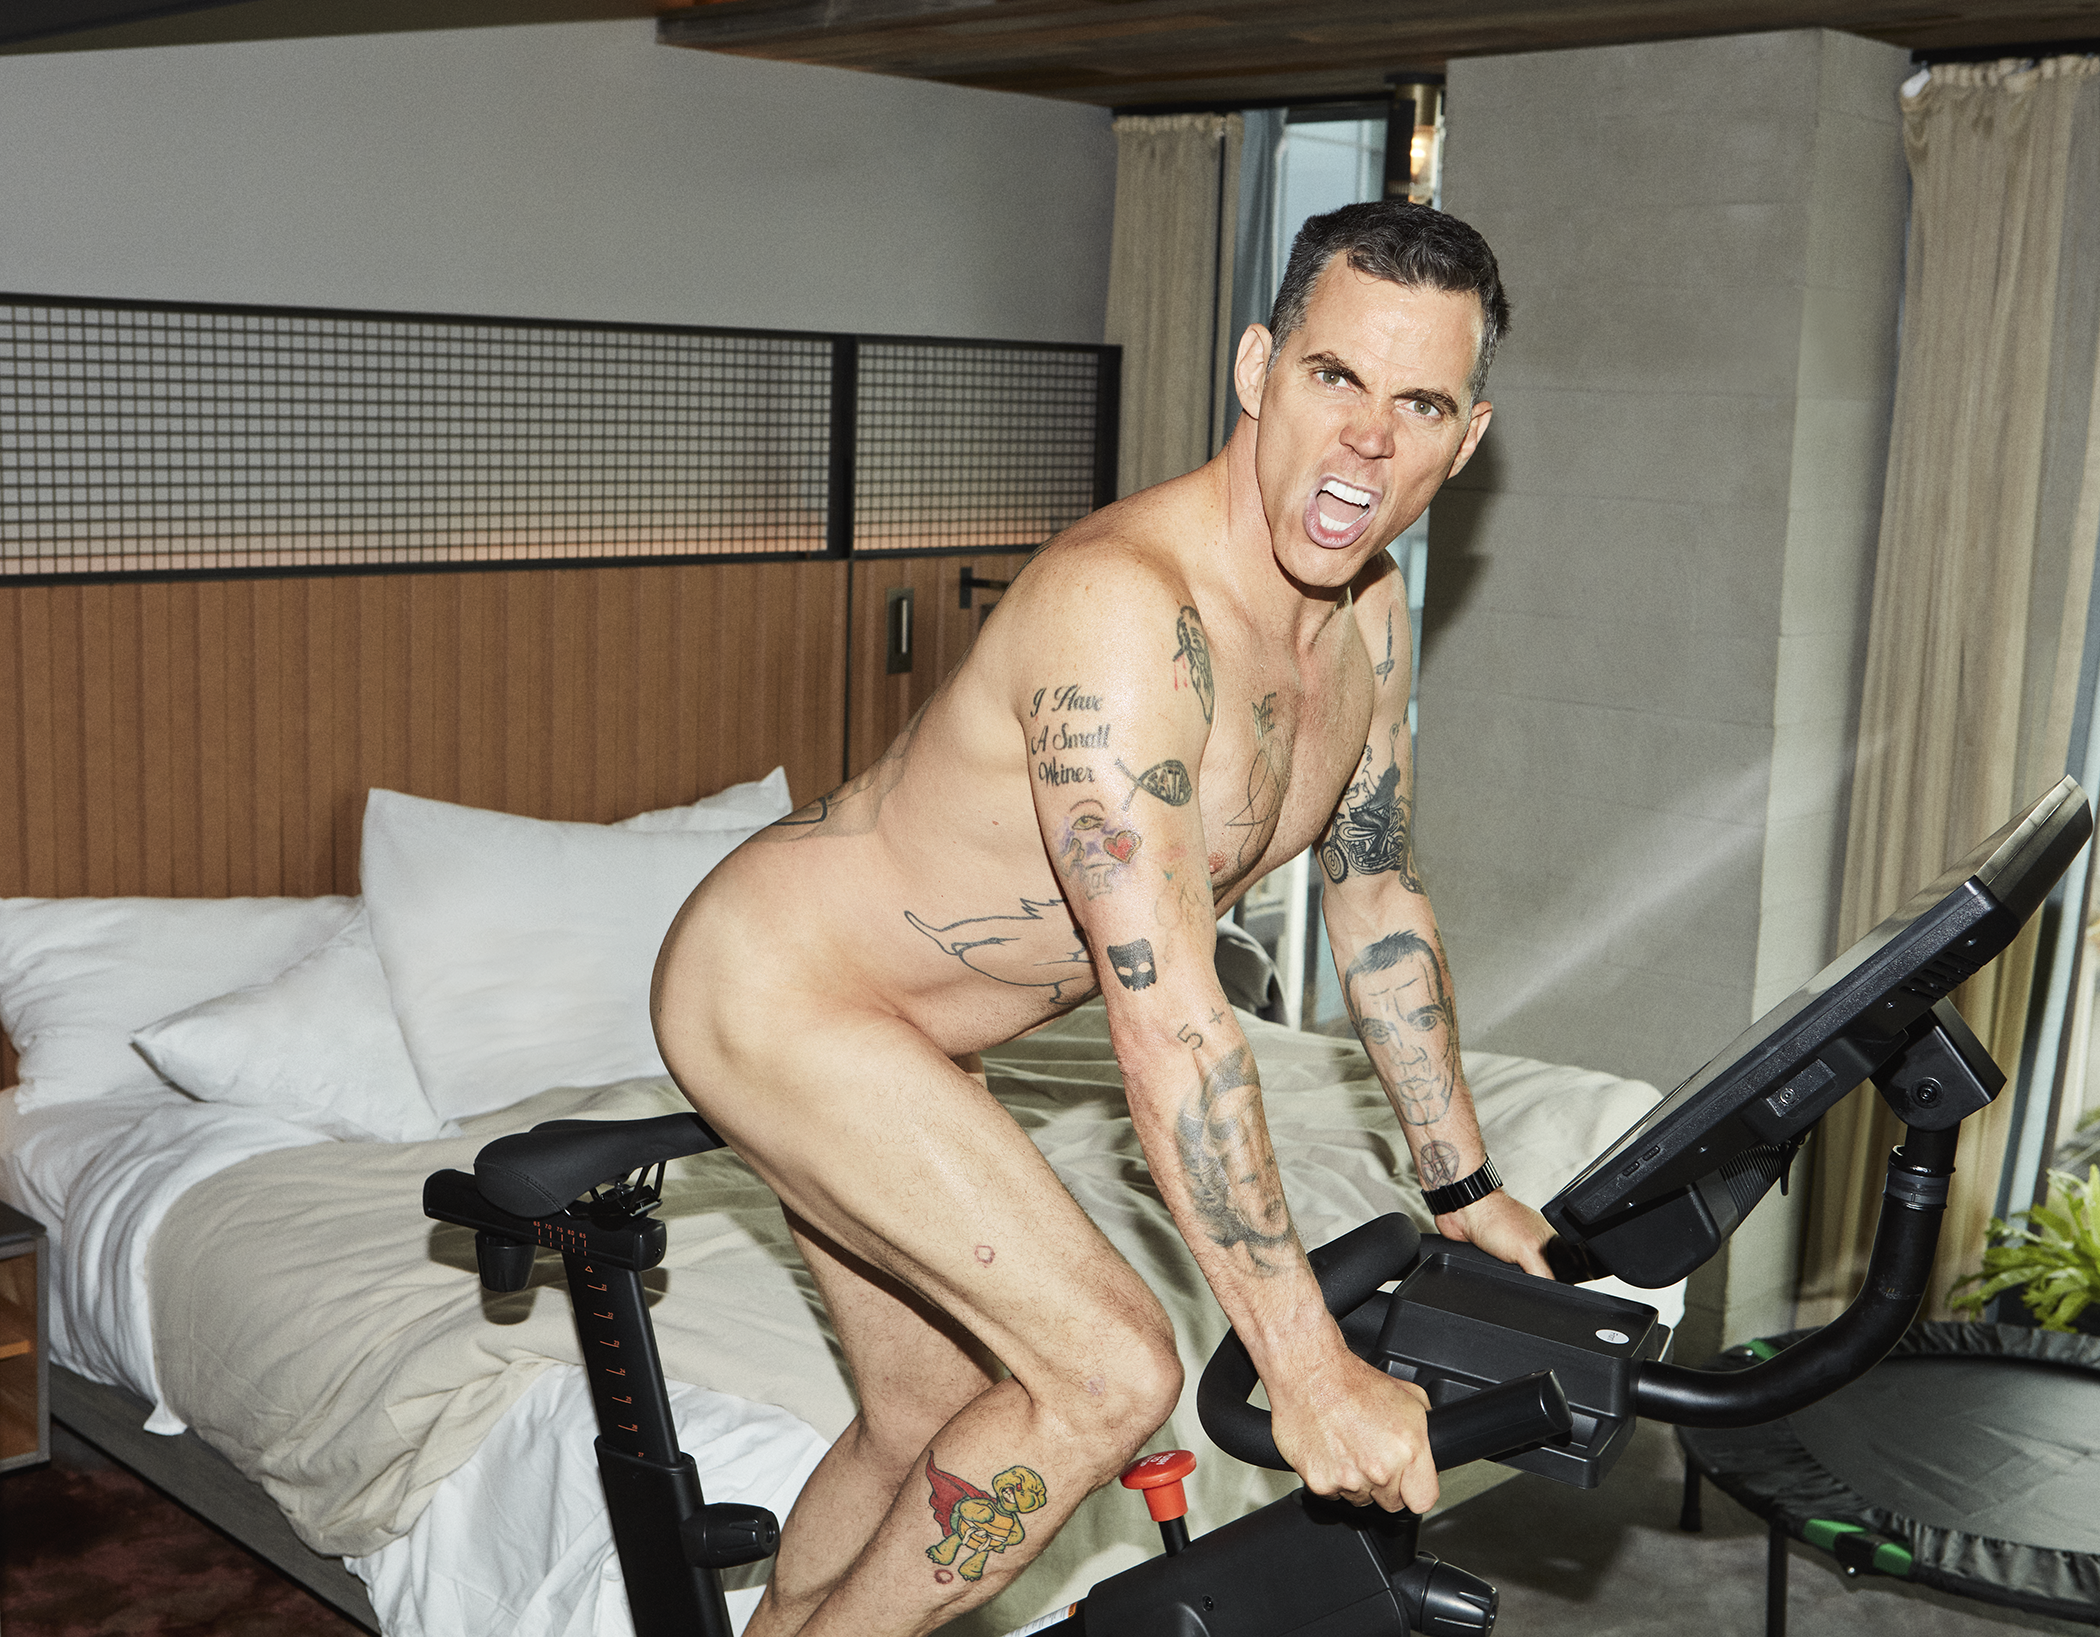 Steve-O Talks Comedy, Stunts, Sobriety and All Things Jackass